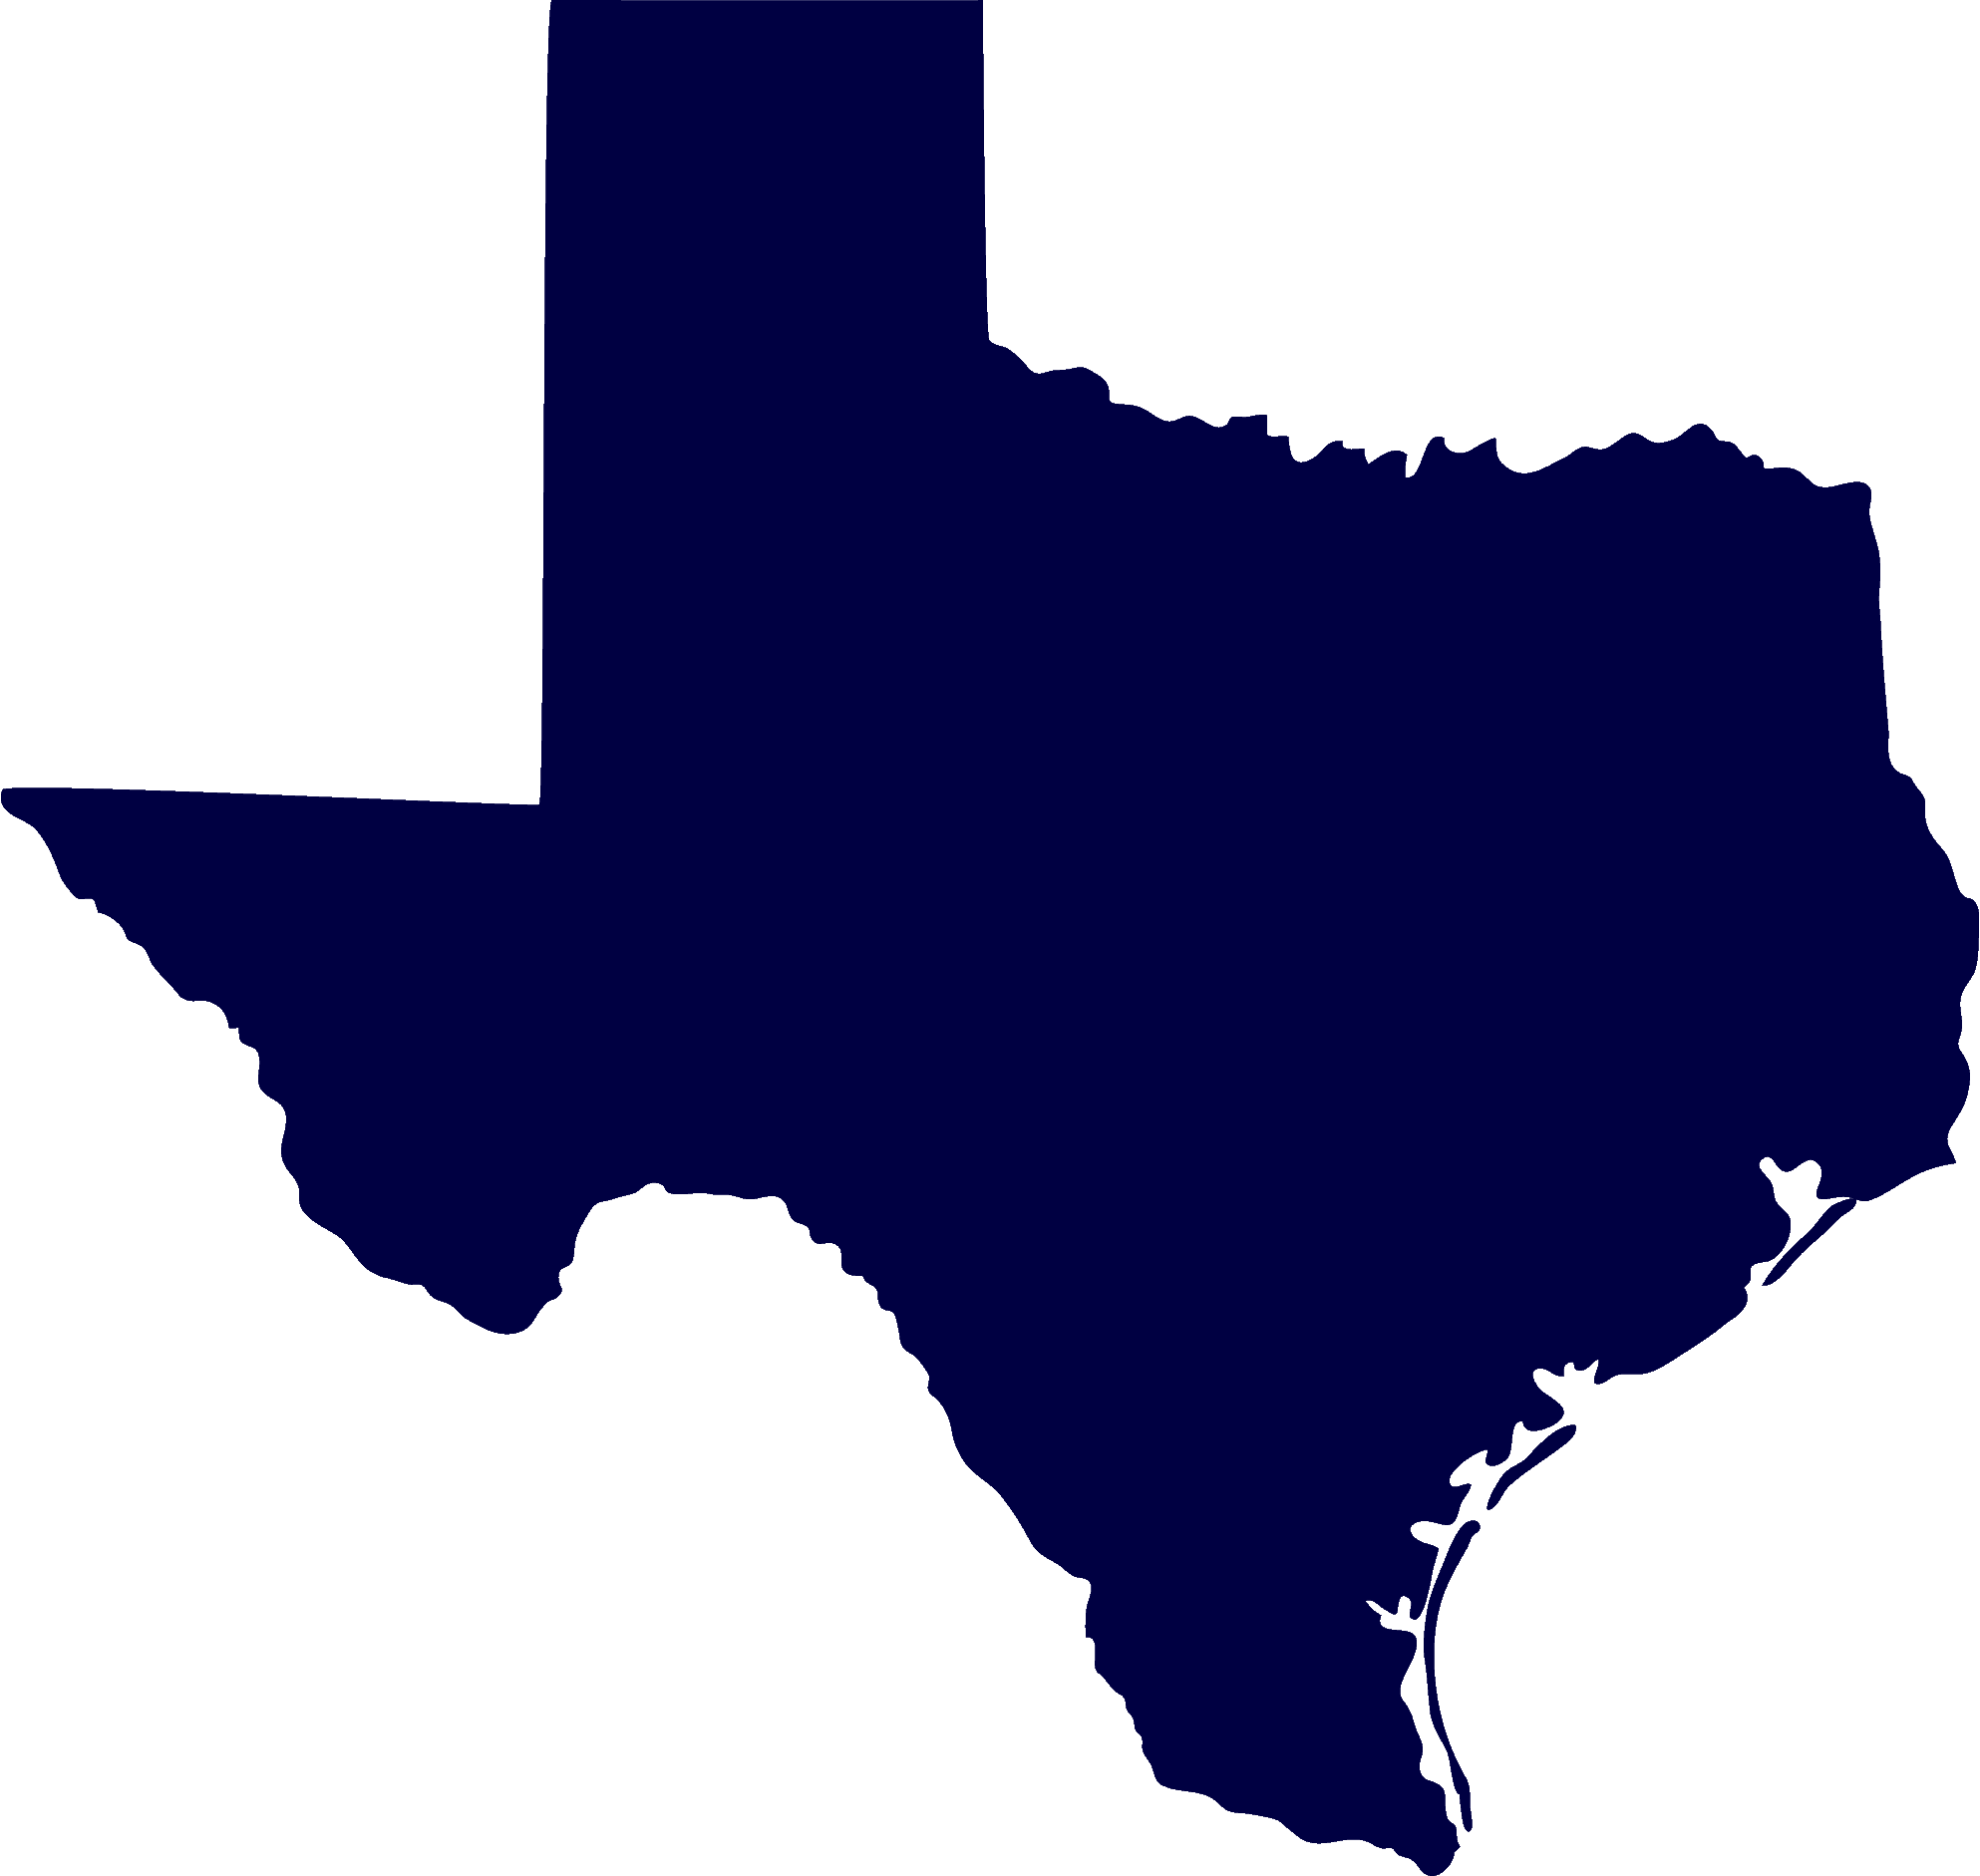 The state of Texas is shown on a white background representing home.